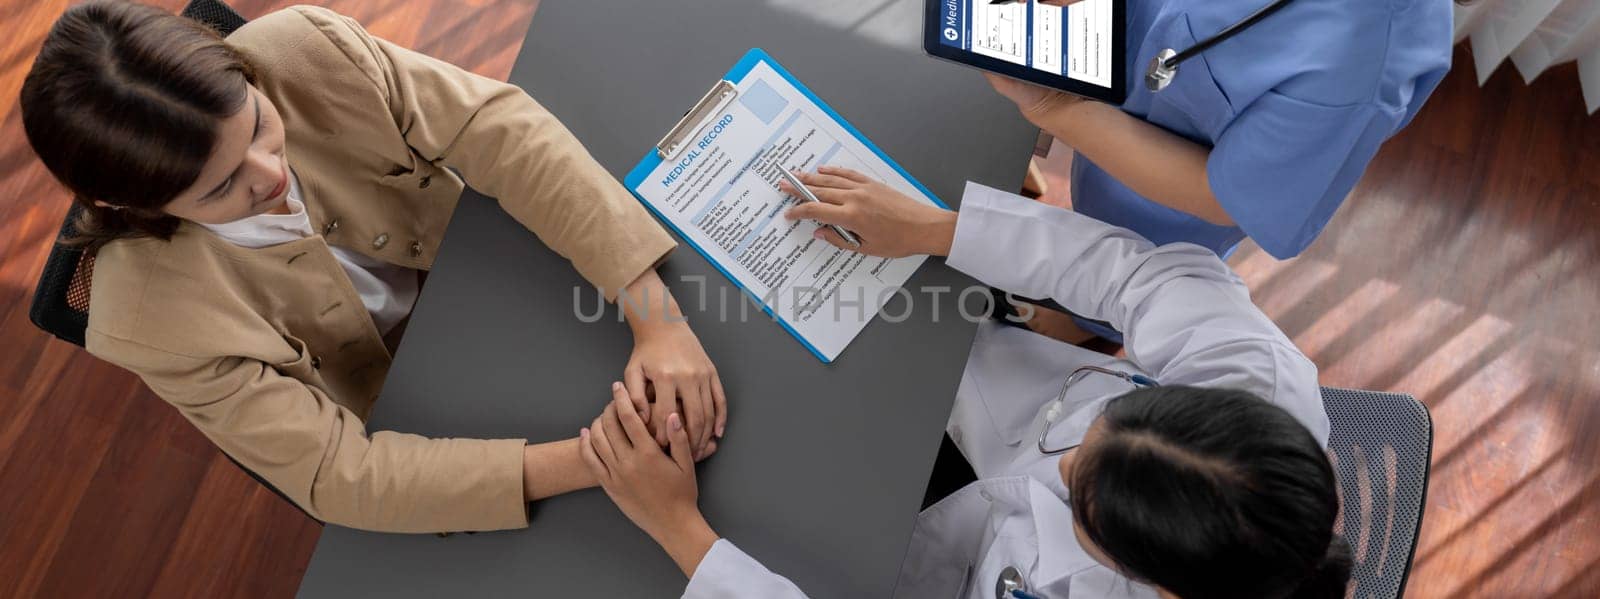 Doctor show medical diagnosis report and providing compassionate healthcare consultation, holding young patient hand for being supportive and professional in doctor clinic office. Top view Neoteric